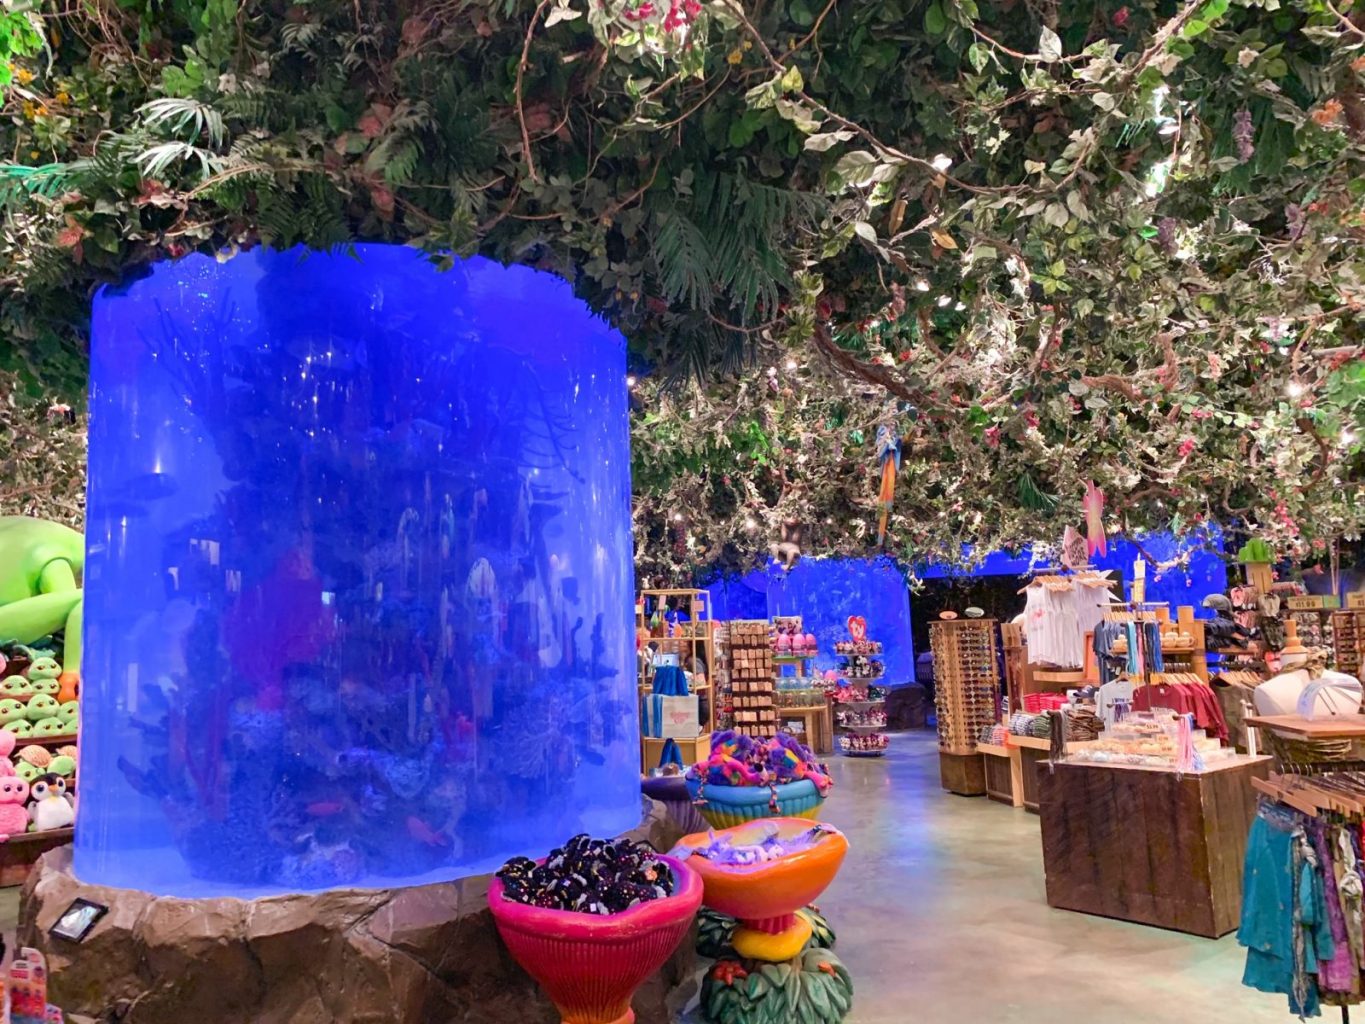 animal kingdom breakfast rainforest cafe with plants coming down from ceiling in gift shop area